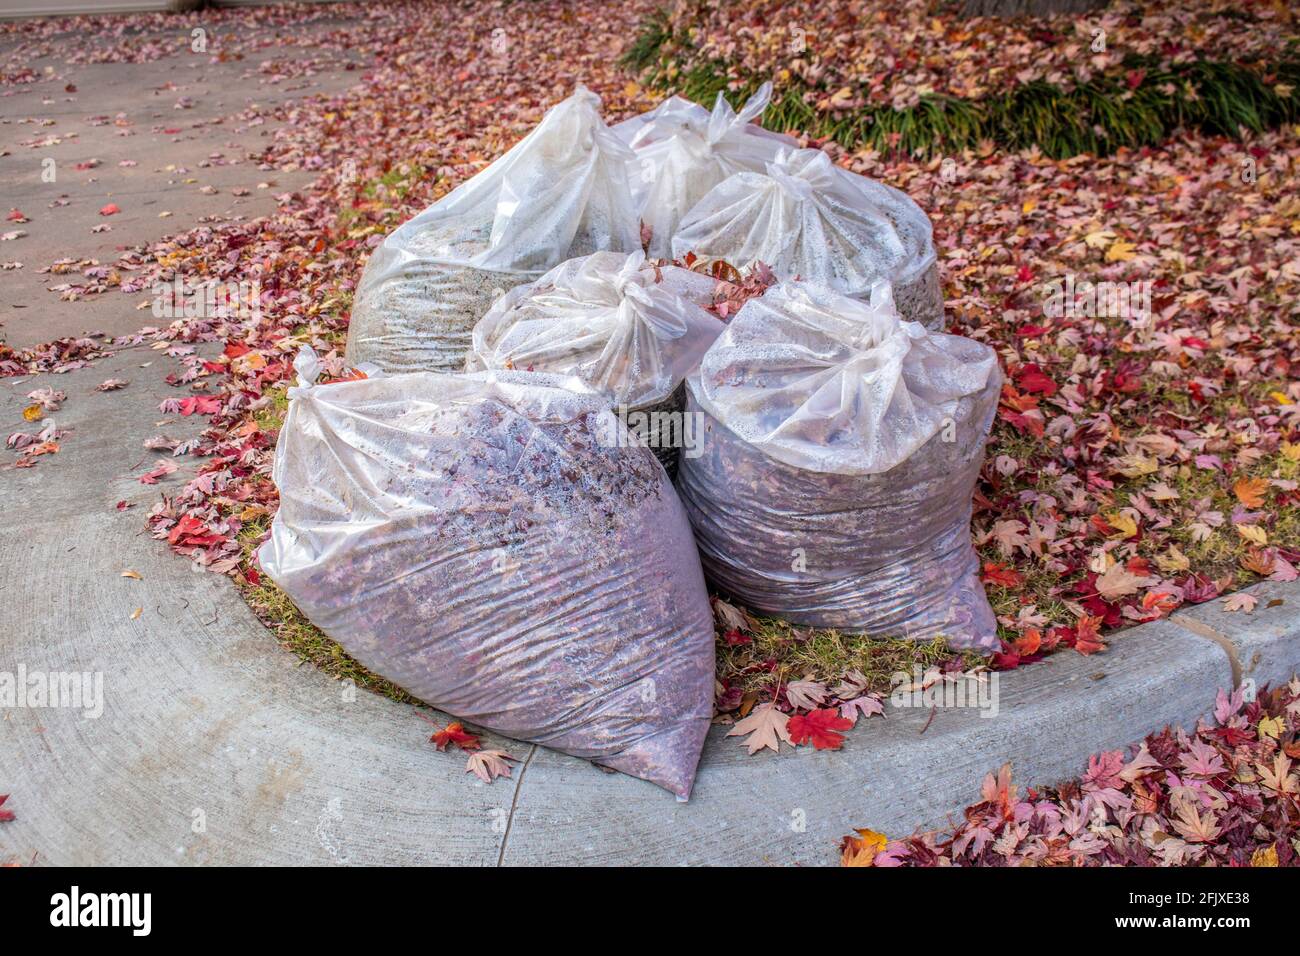 Lawn and leaf bags hi-res stock photography and images - Alamy